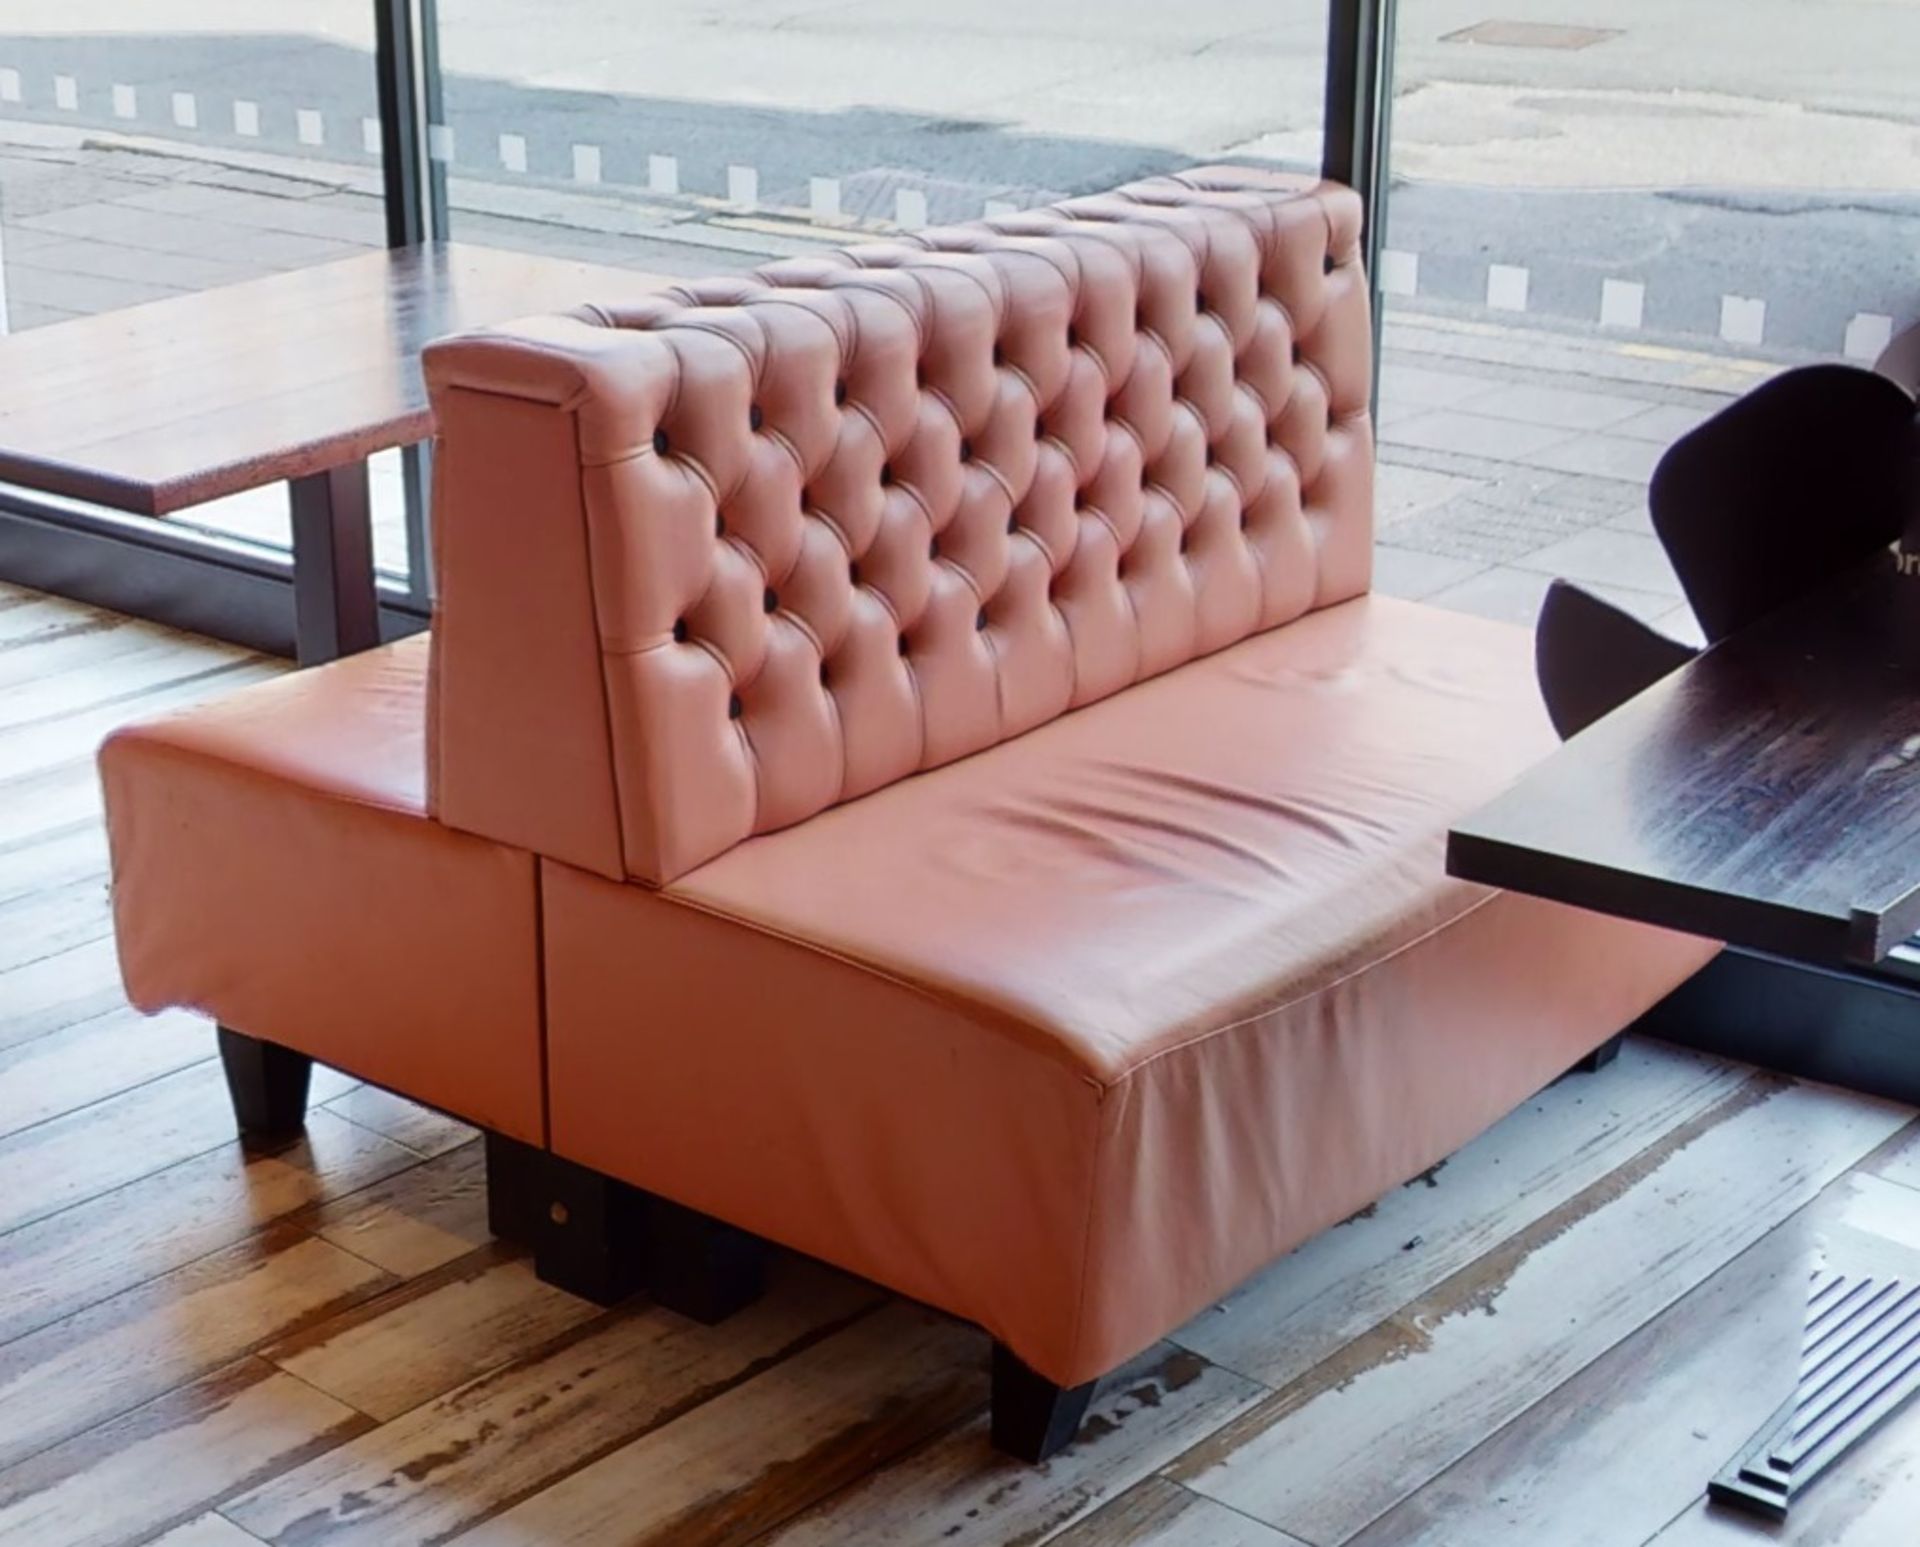 1 x Back to Back Seating Bench Featuring Studded Backs and a Salmon Leather Upholstery - Image 2 of 3